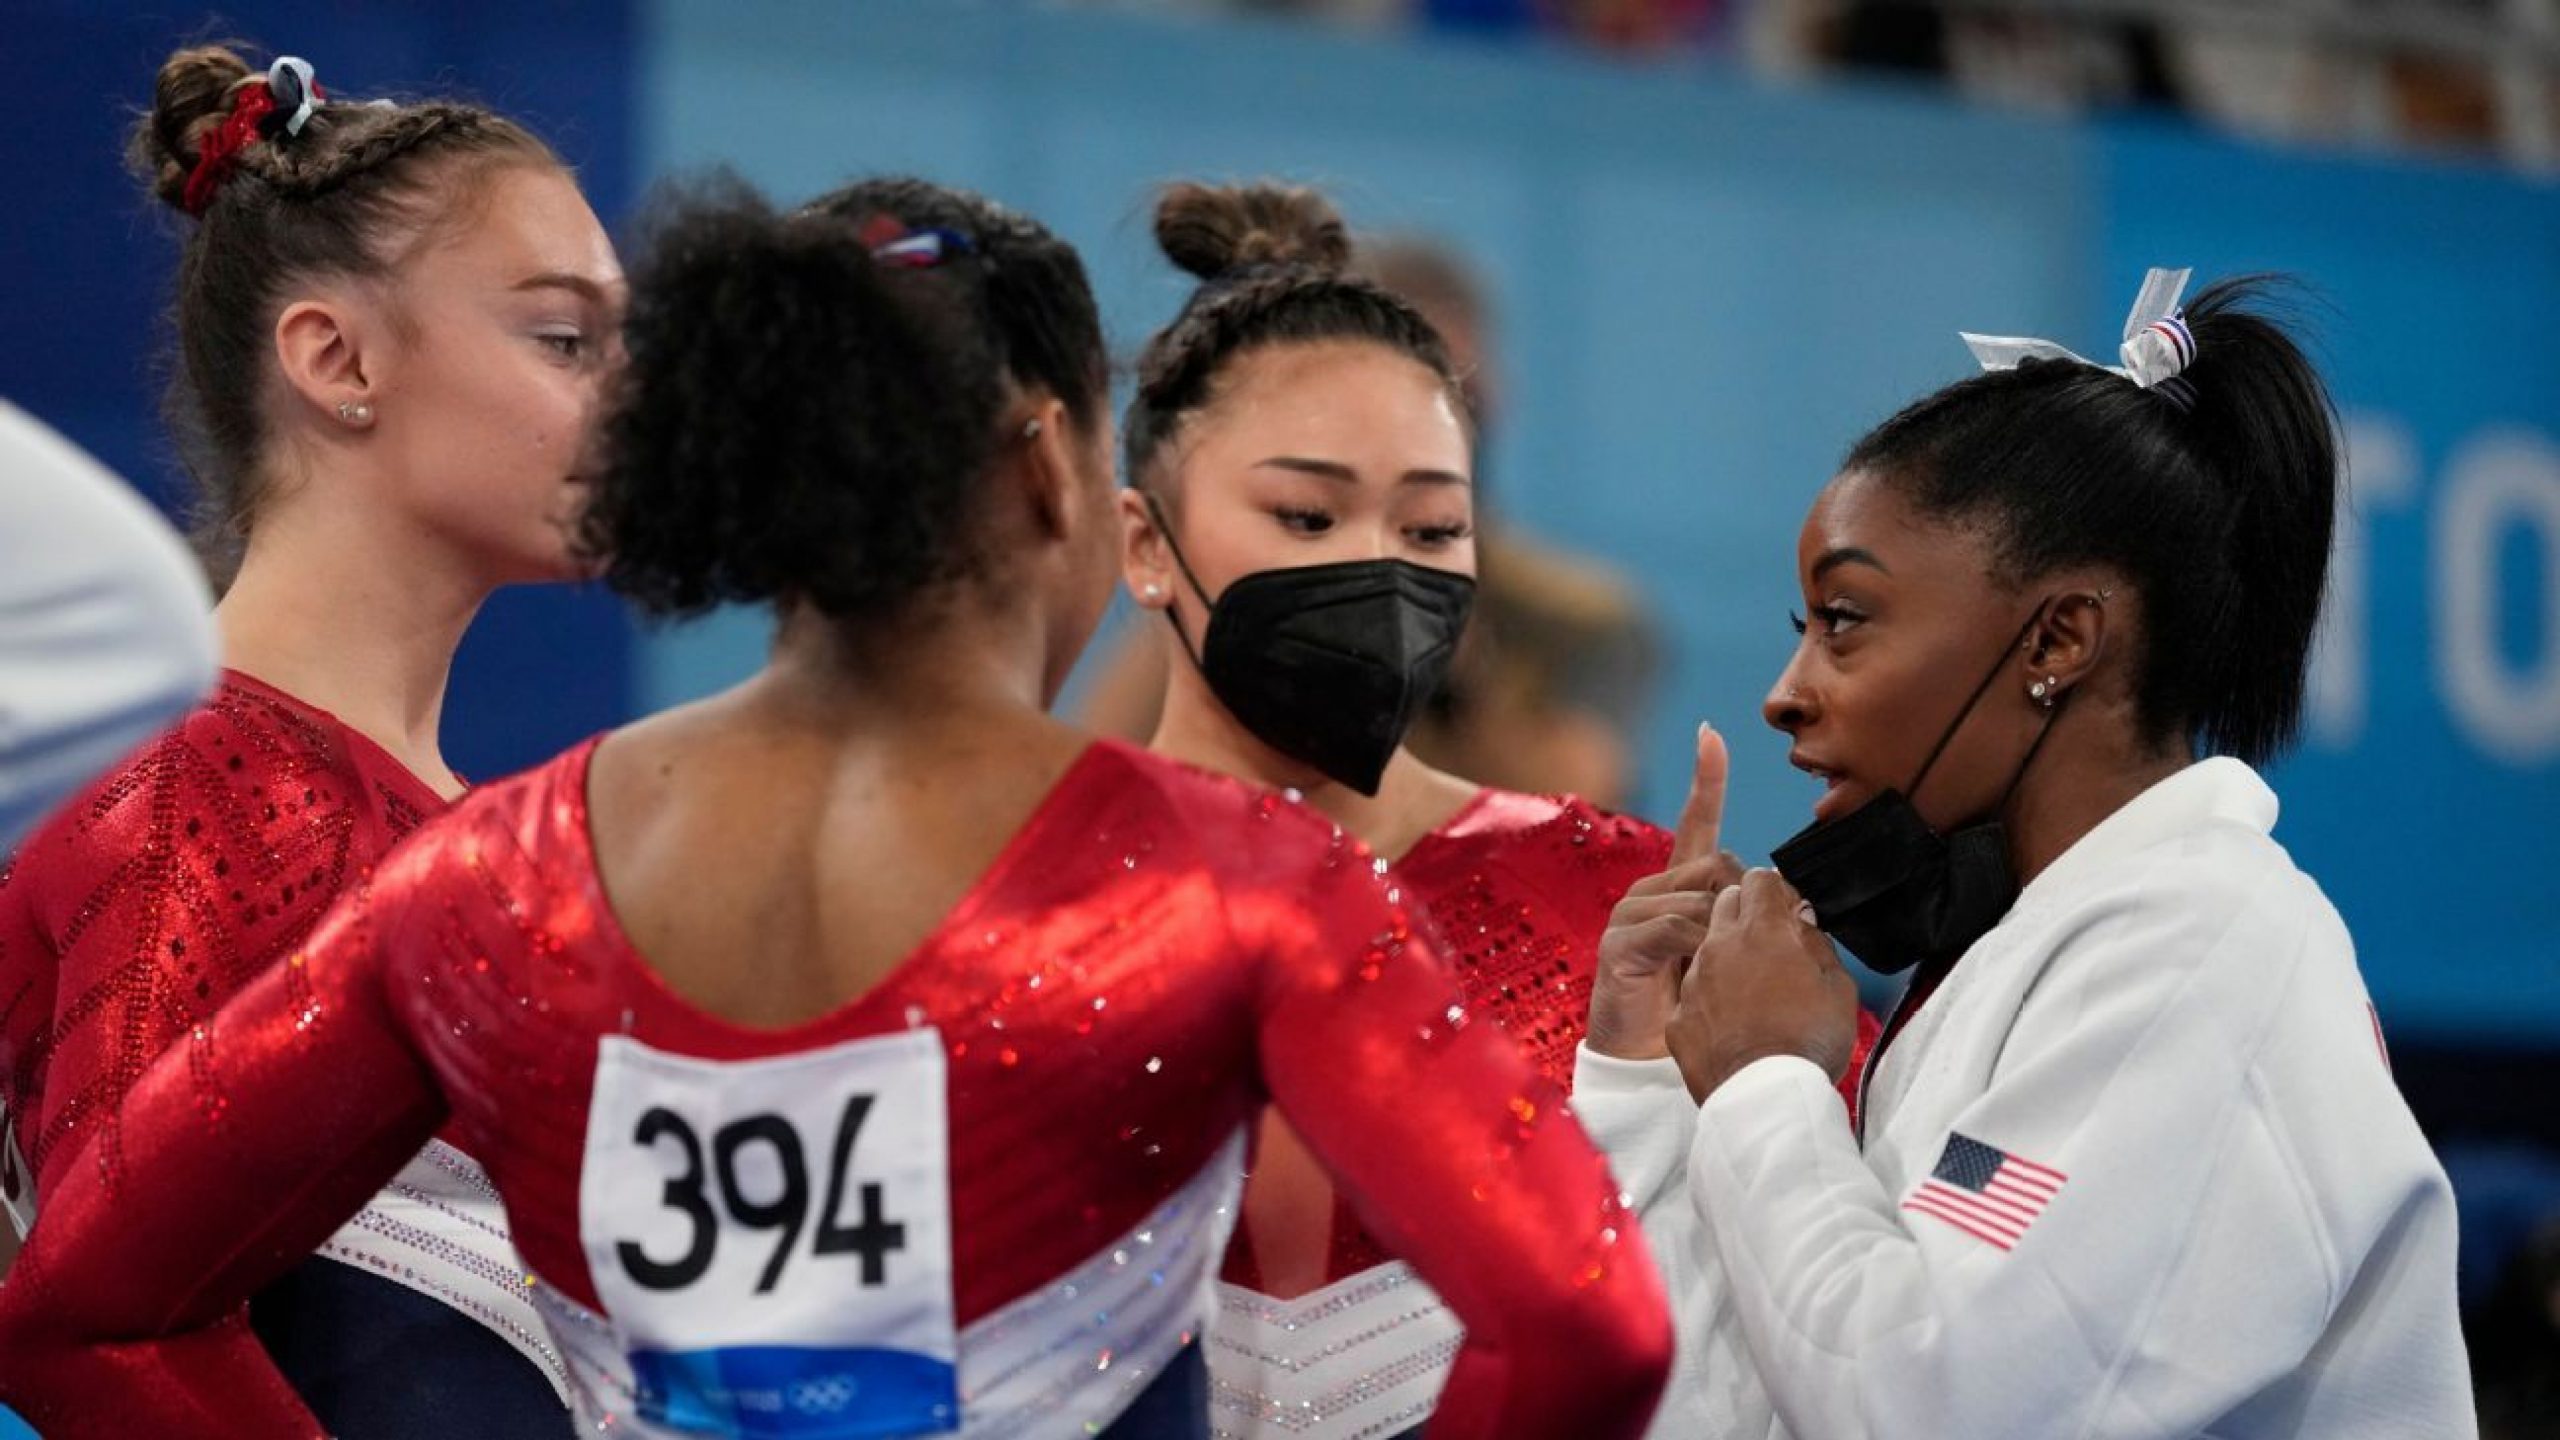 ‘You have to be 100%’: Why Simone Biles withdrew from the team final